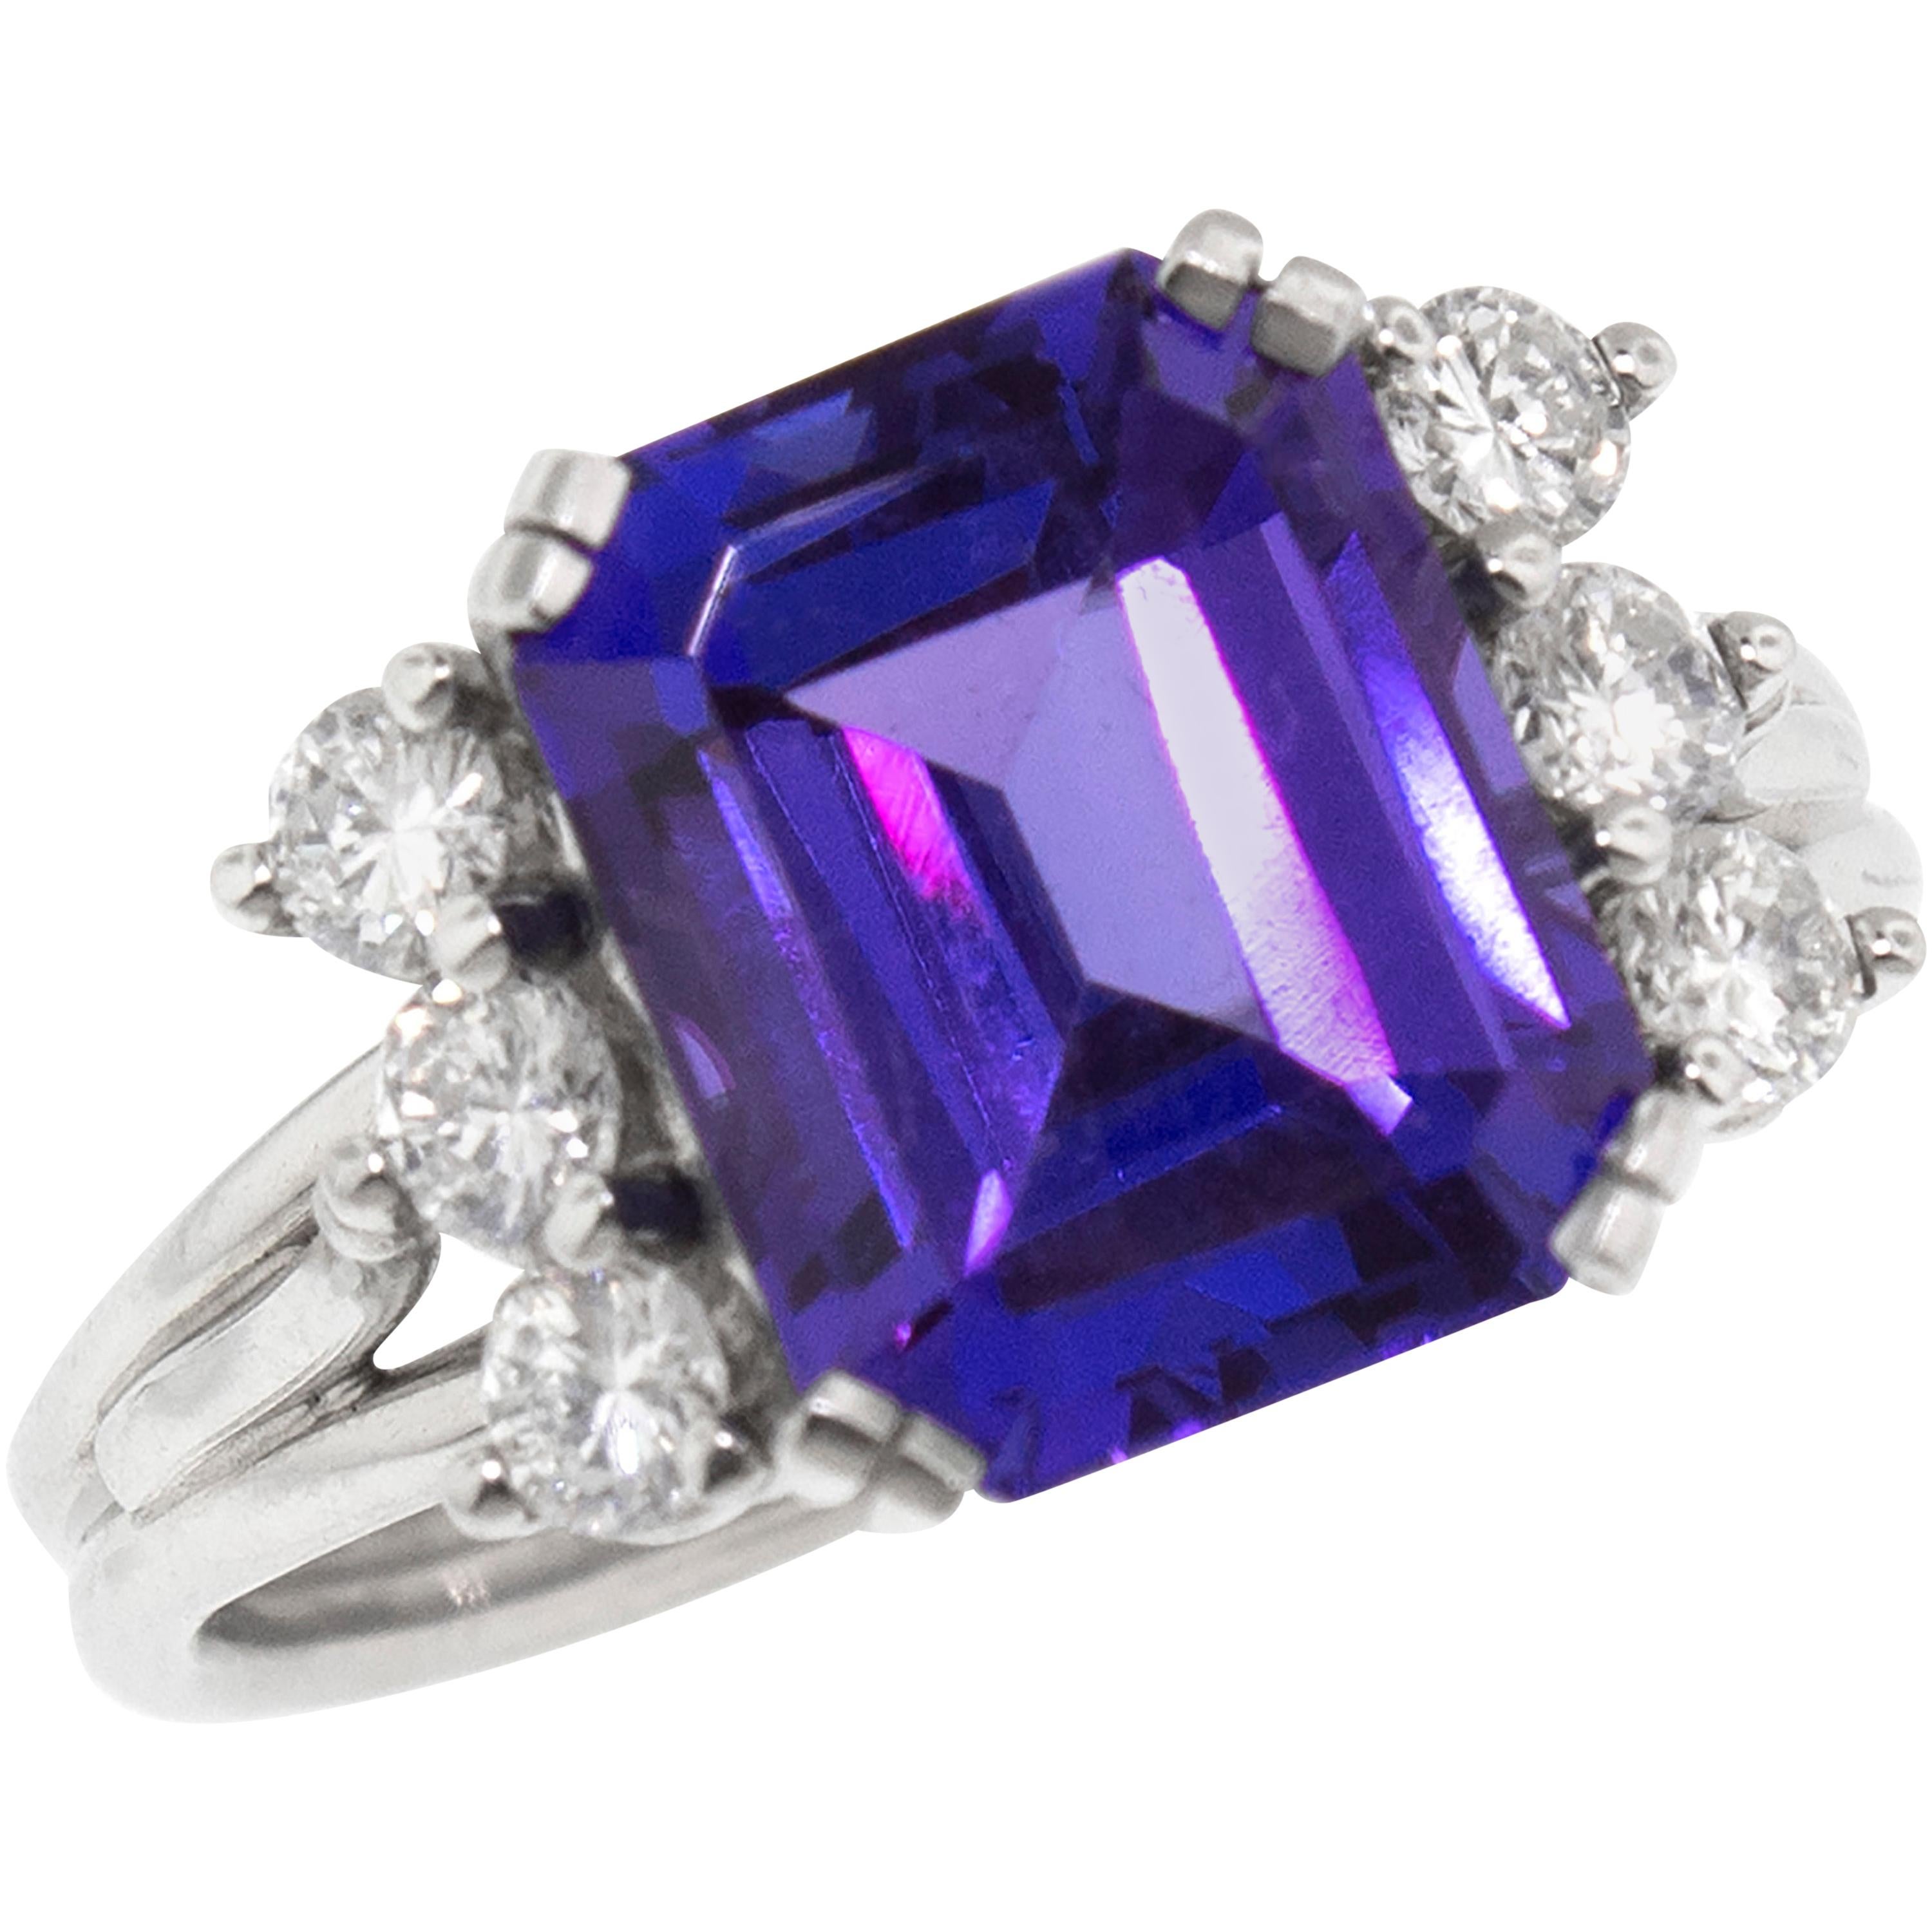 Early Mined 4.85 Carat Tanzanite in Diamond and Platinum Custom Vintage  Ring